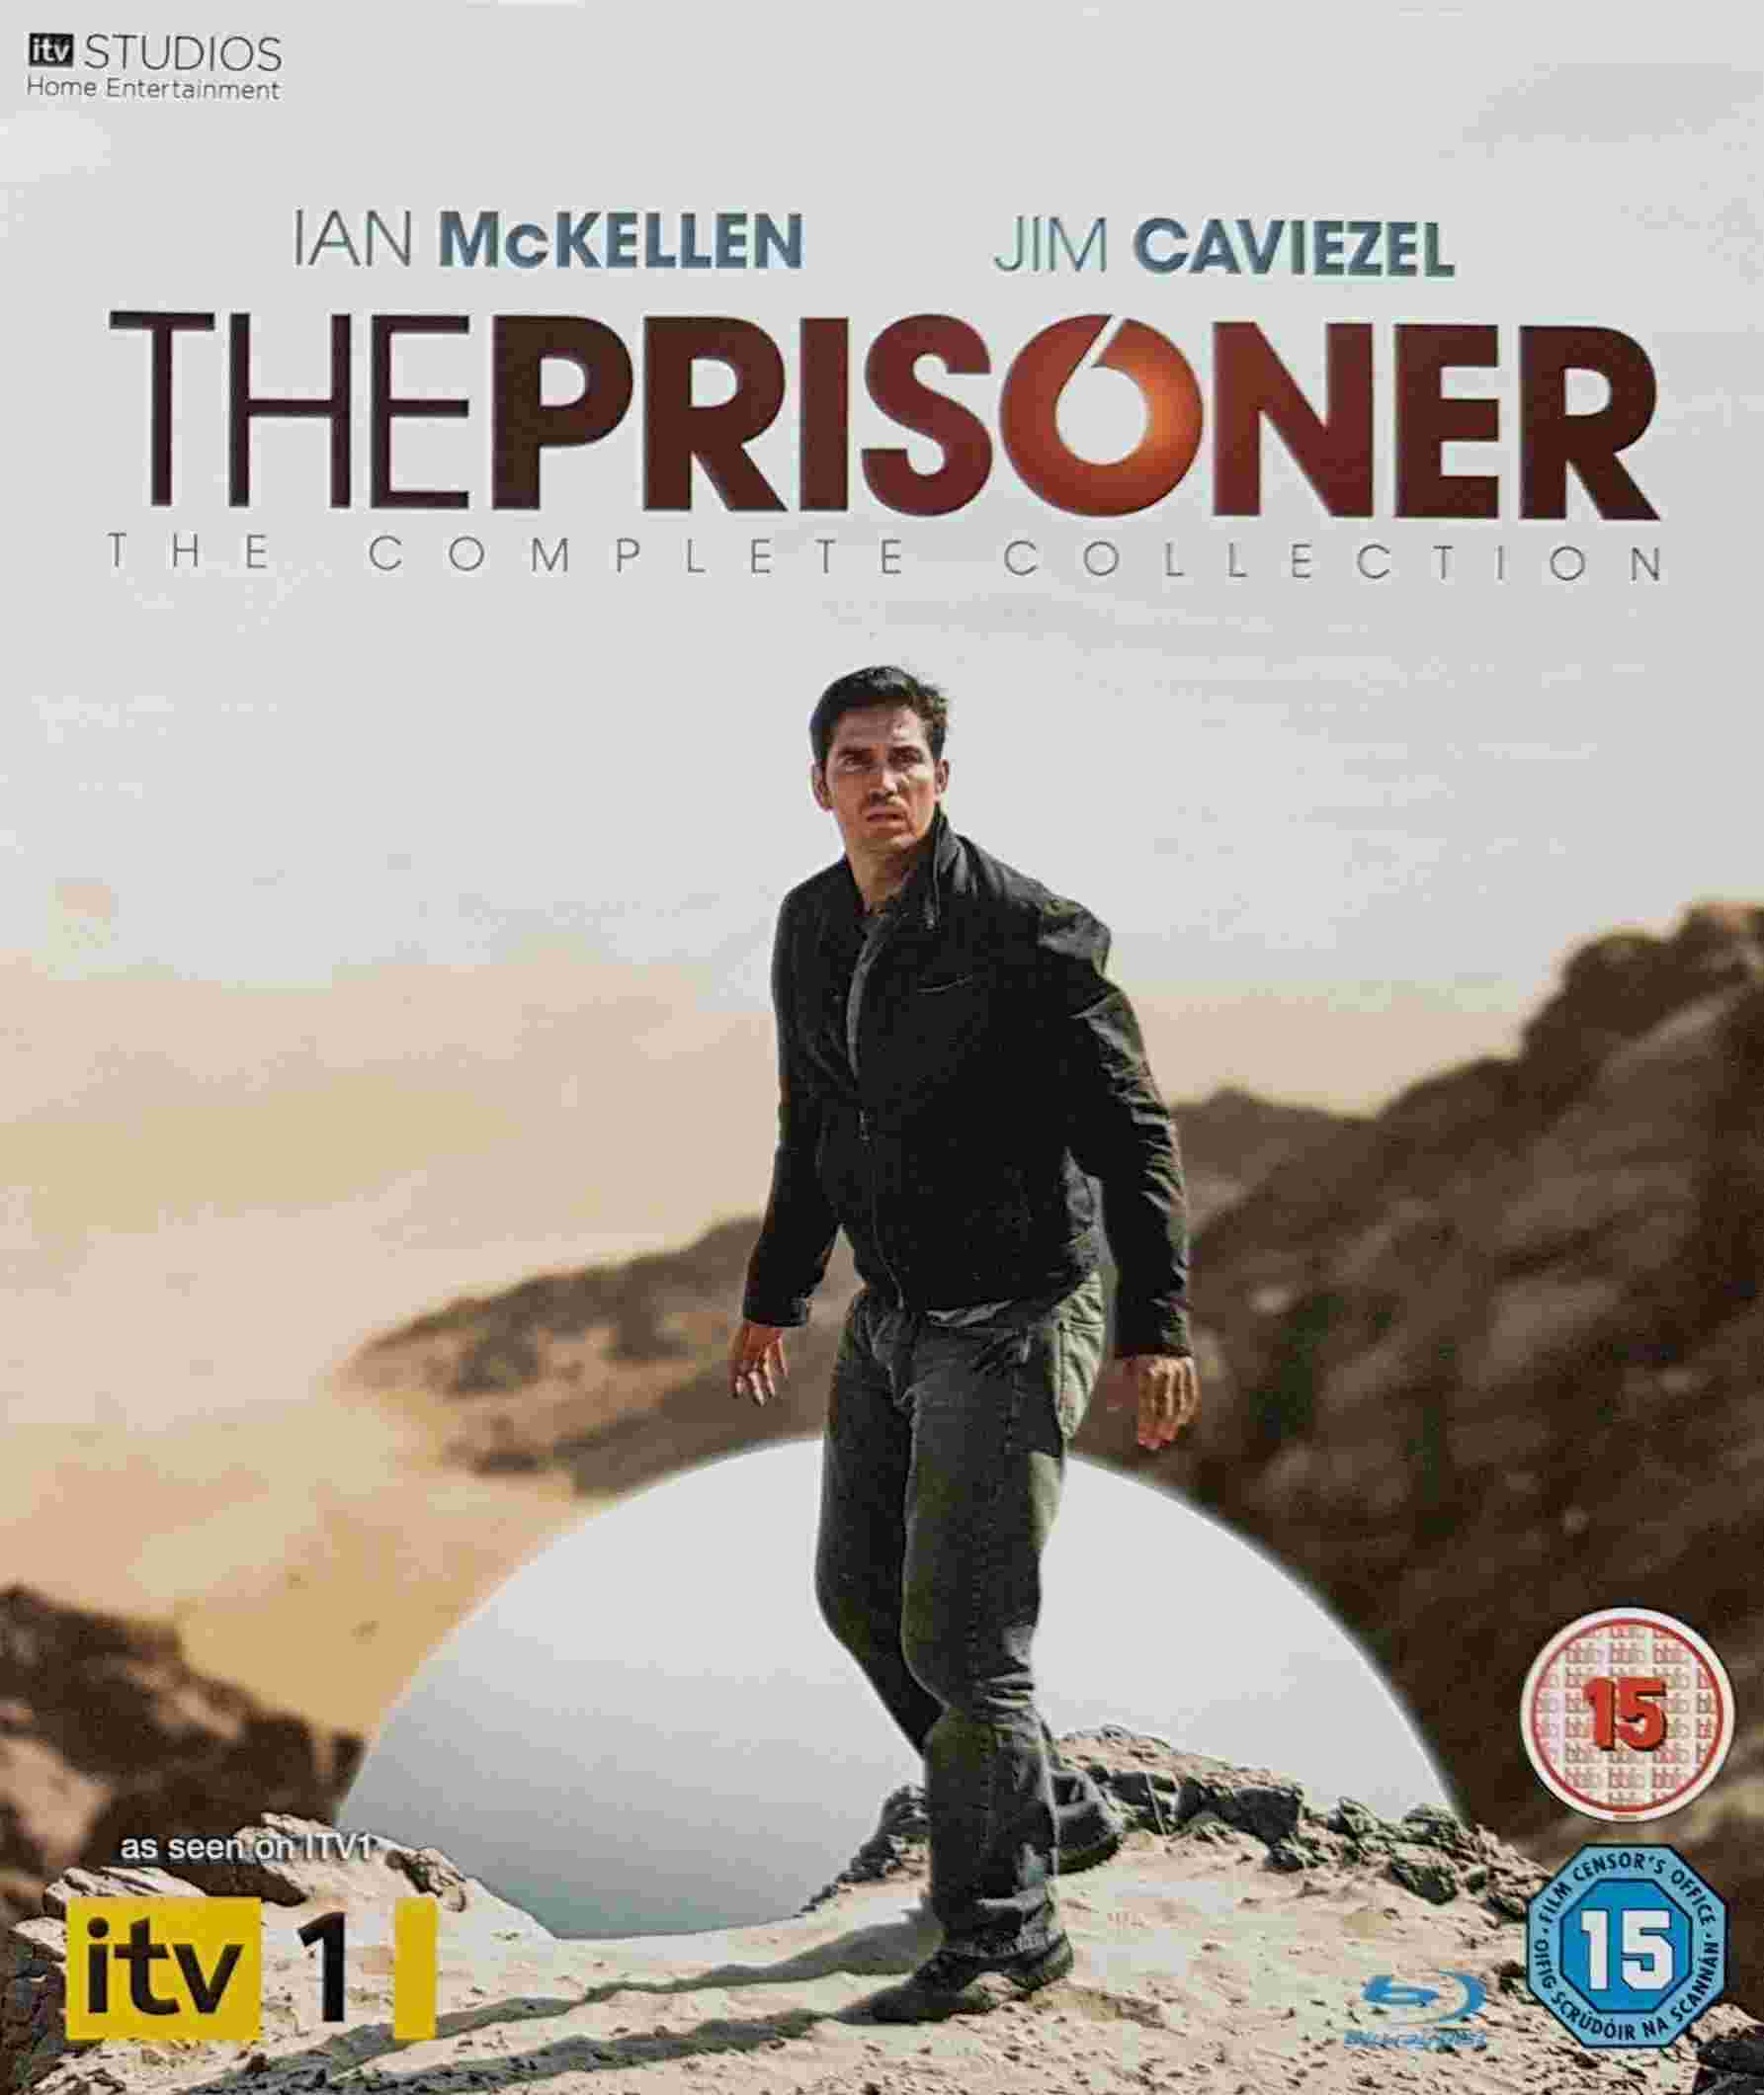 Picture of The Prisoner by artist Bill Gallagher from ITV, Channel 4 and Channel 5 blu-rays library